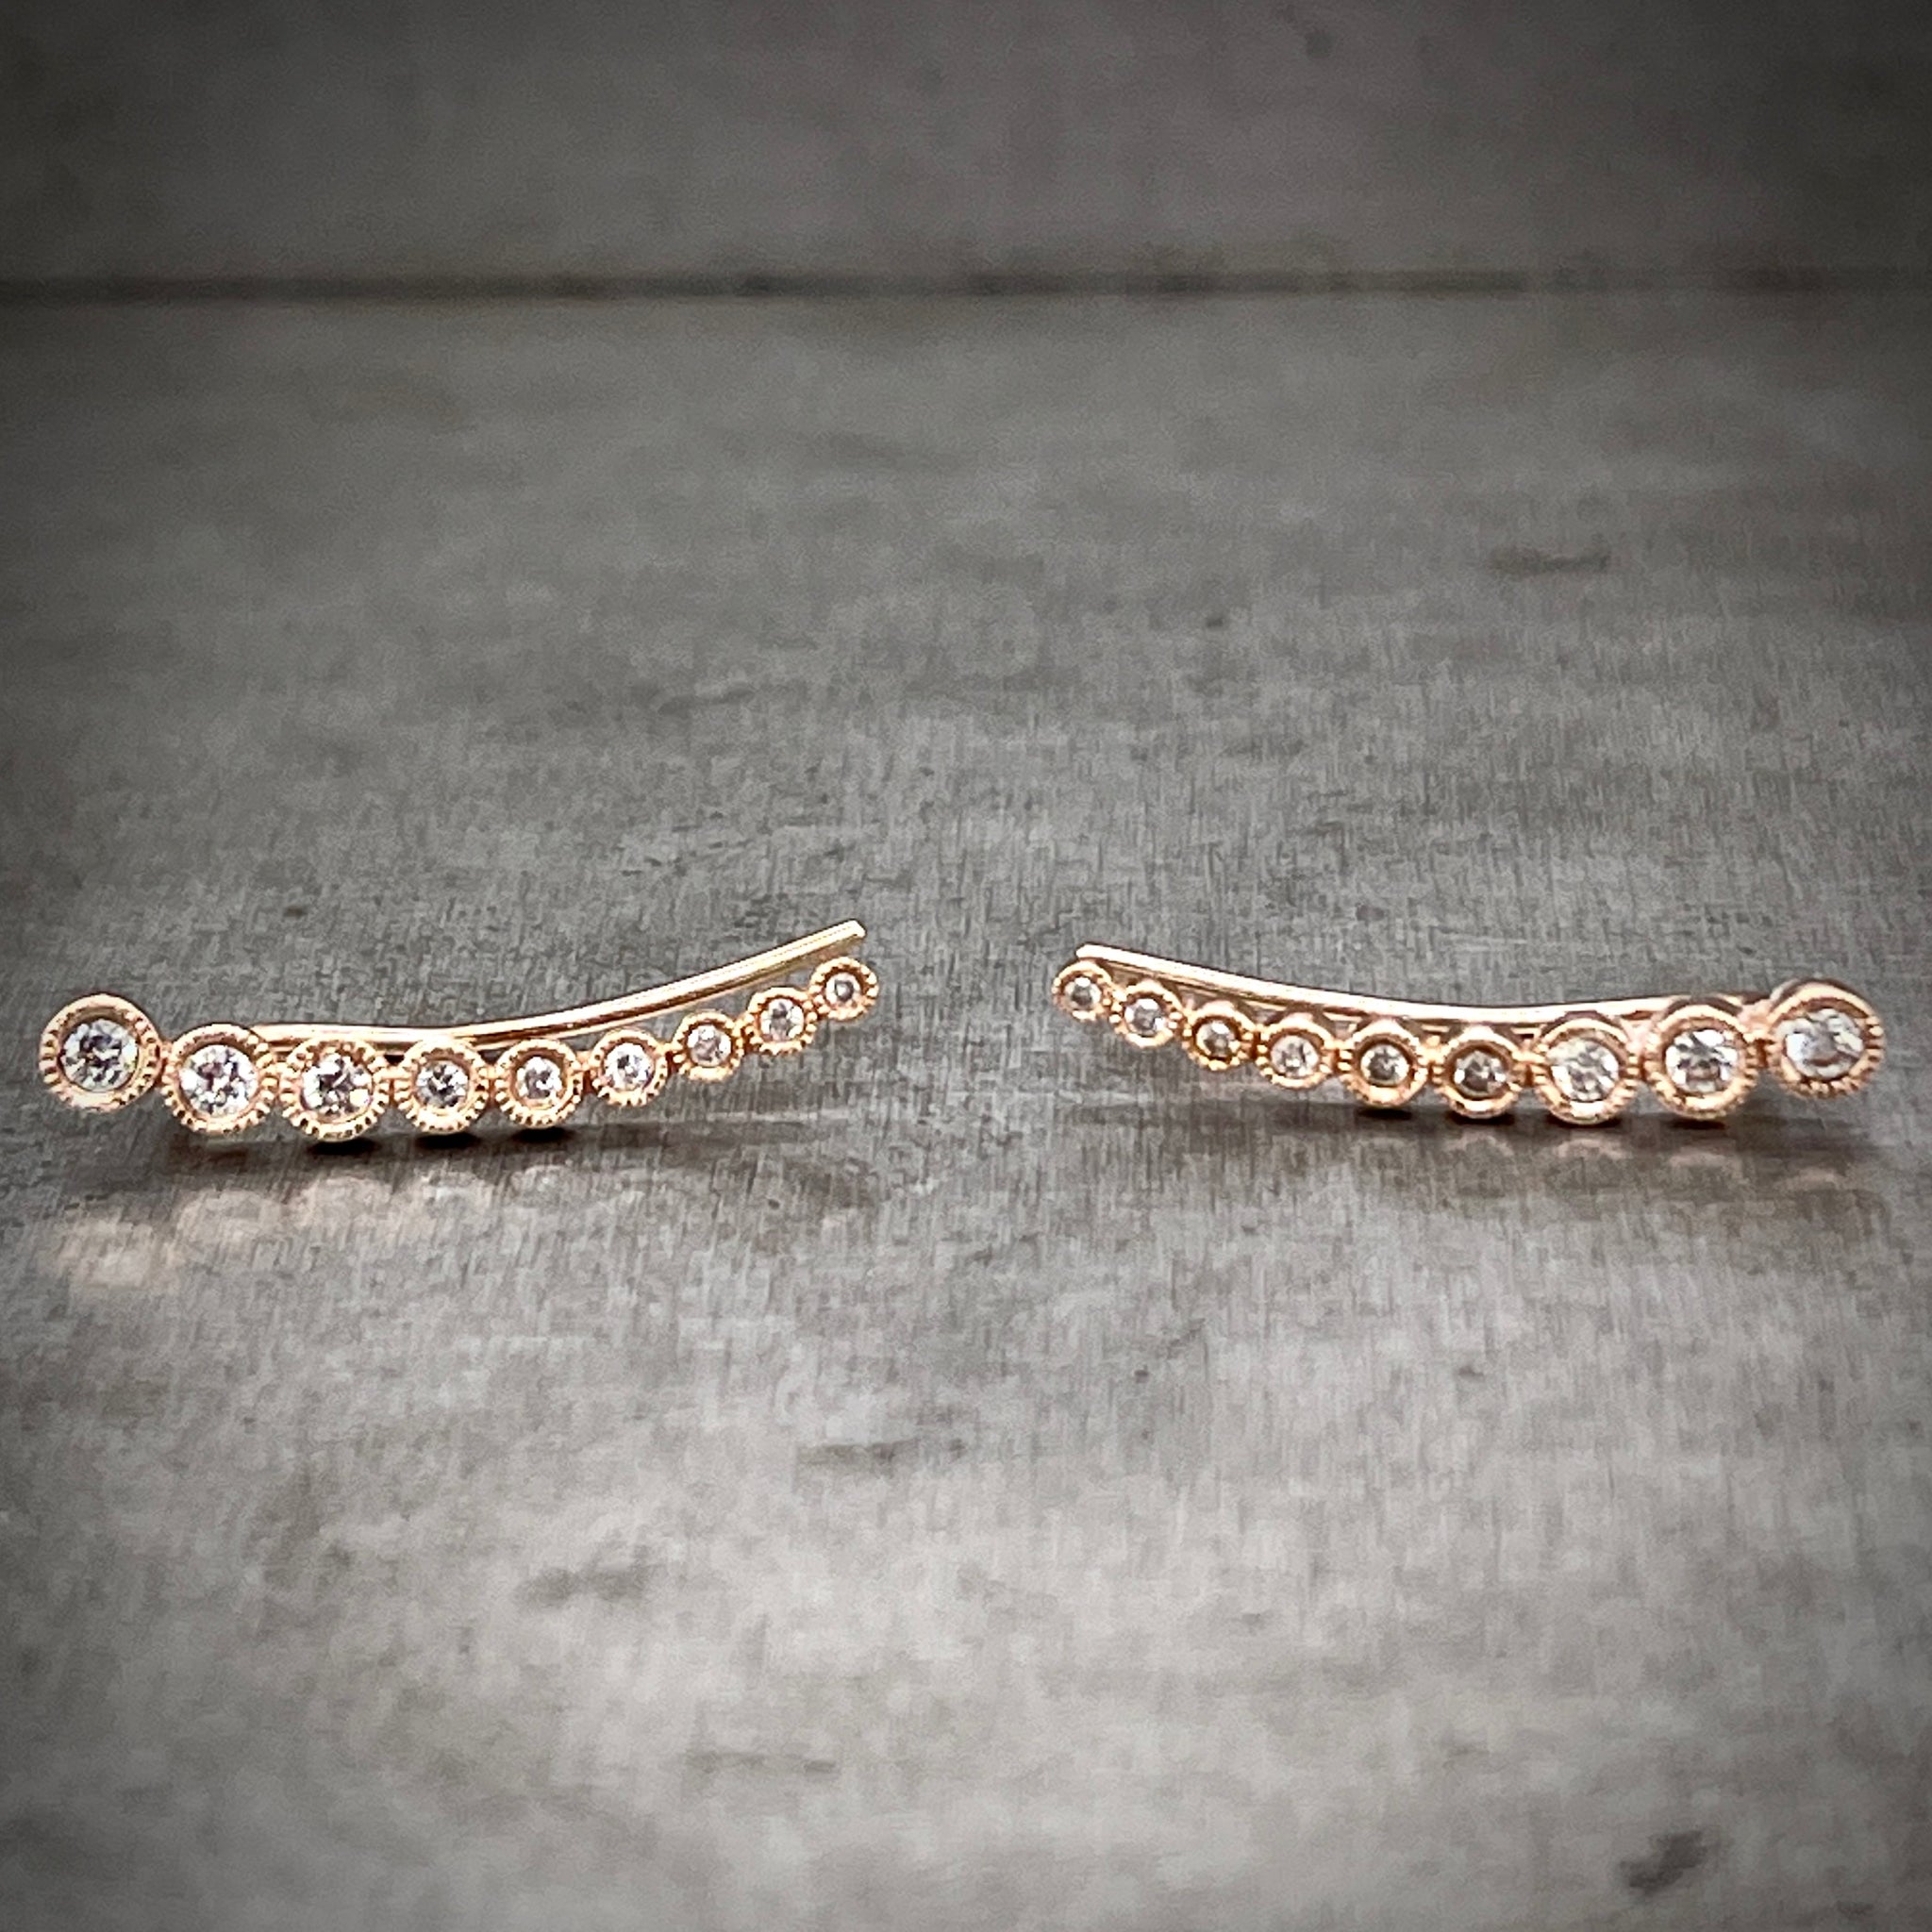 Full view of rose gold and diamond ear climbers laying down. Here you can see the slight curve of the earrings that make the perfect ear slope. The diamonds gradually go down in size, the biggest where the earring starts and the smallest at the end of the slope furthest away from the piercing.